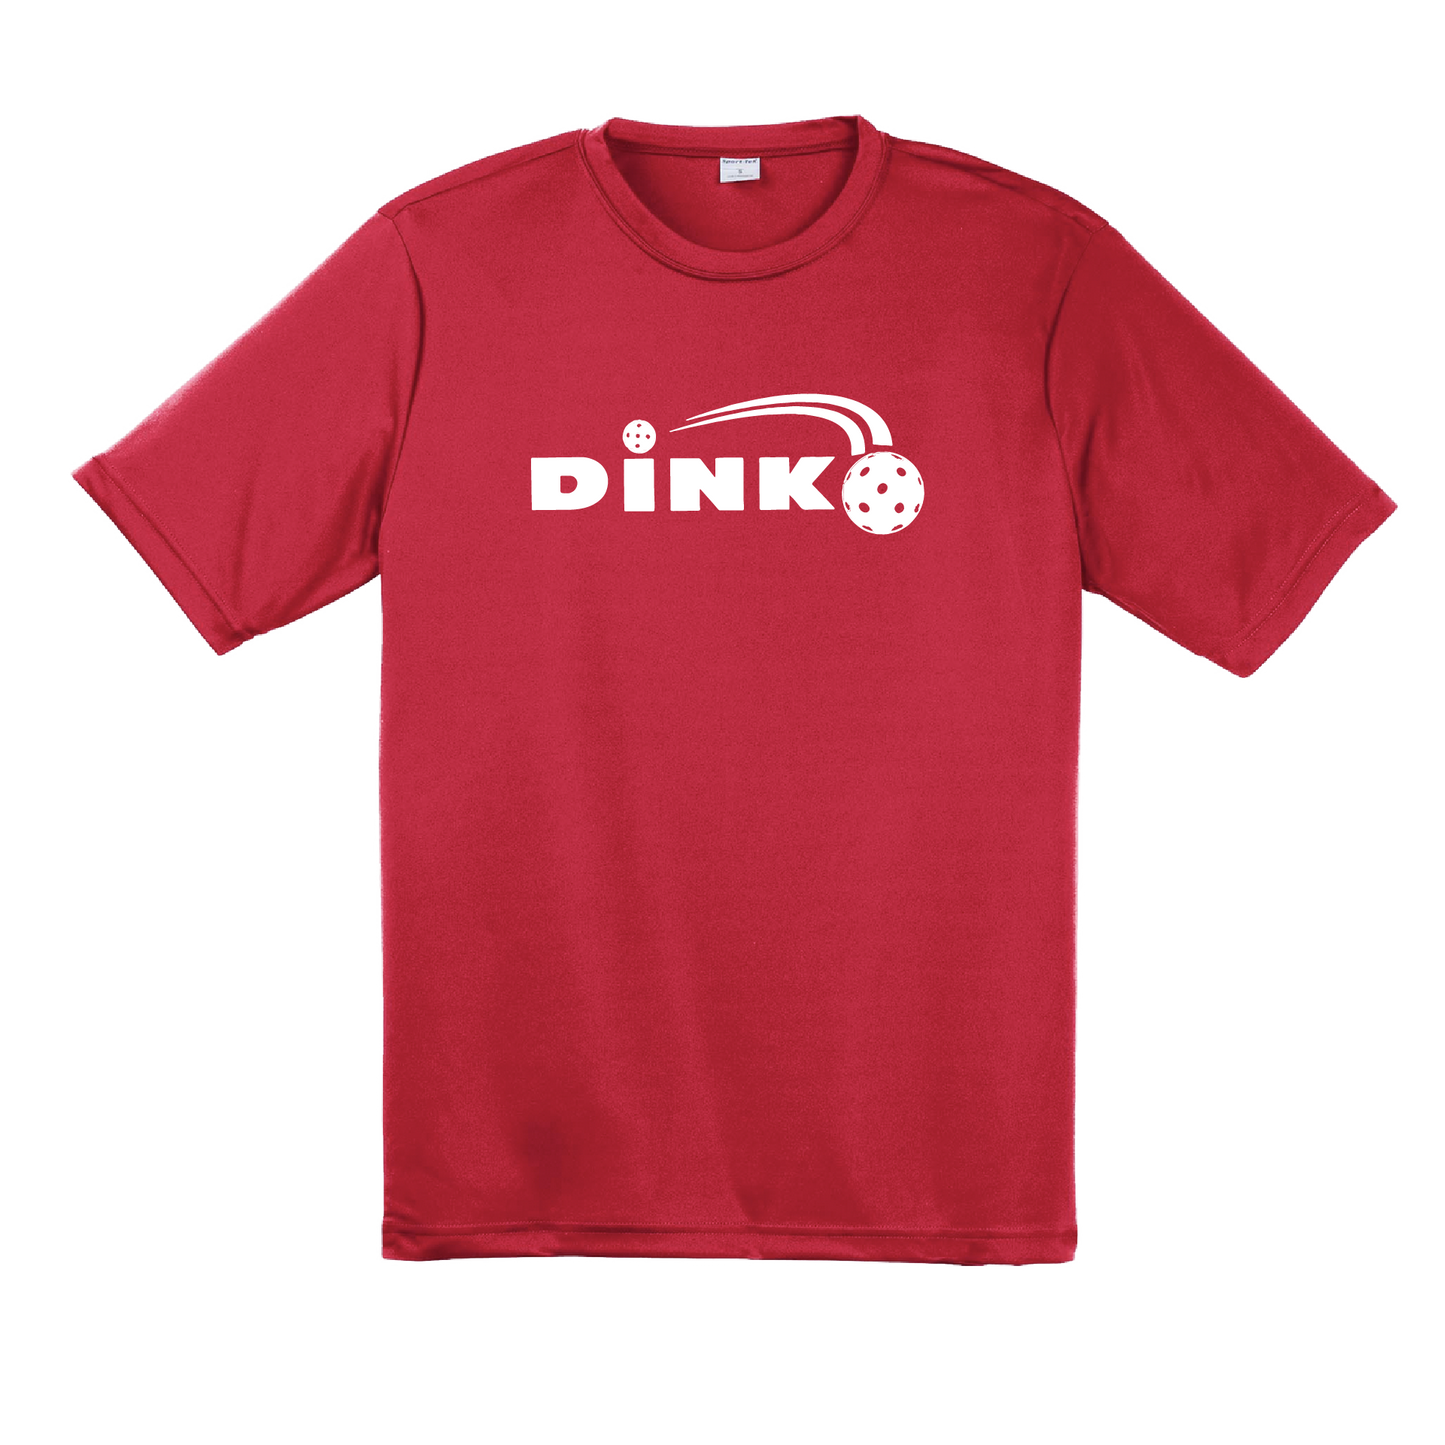 Pickeball Design: Dink  Men's Style: Short-Sleeve (SS)  Shirts are lightweight, roomy and highly breathable. These moisture-wicking shirts are designed for athletic performance. They feature PosiCharge technology to lock in color and prevent logos from fading. Removable tag and set-in sleeves for comfort.